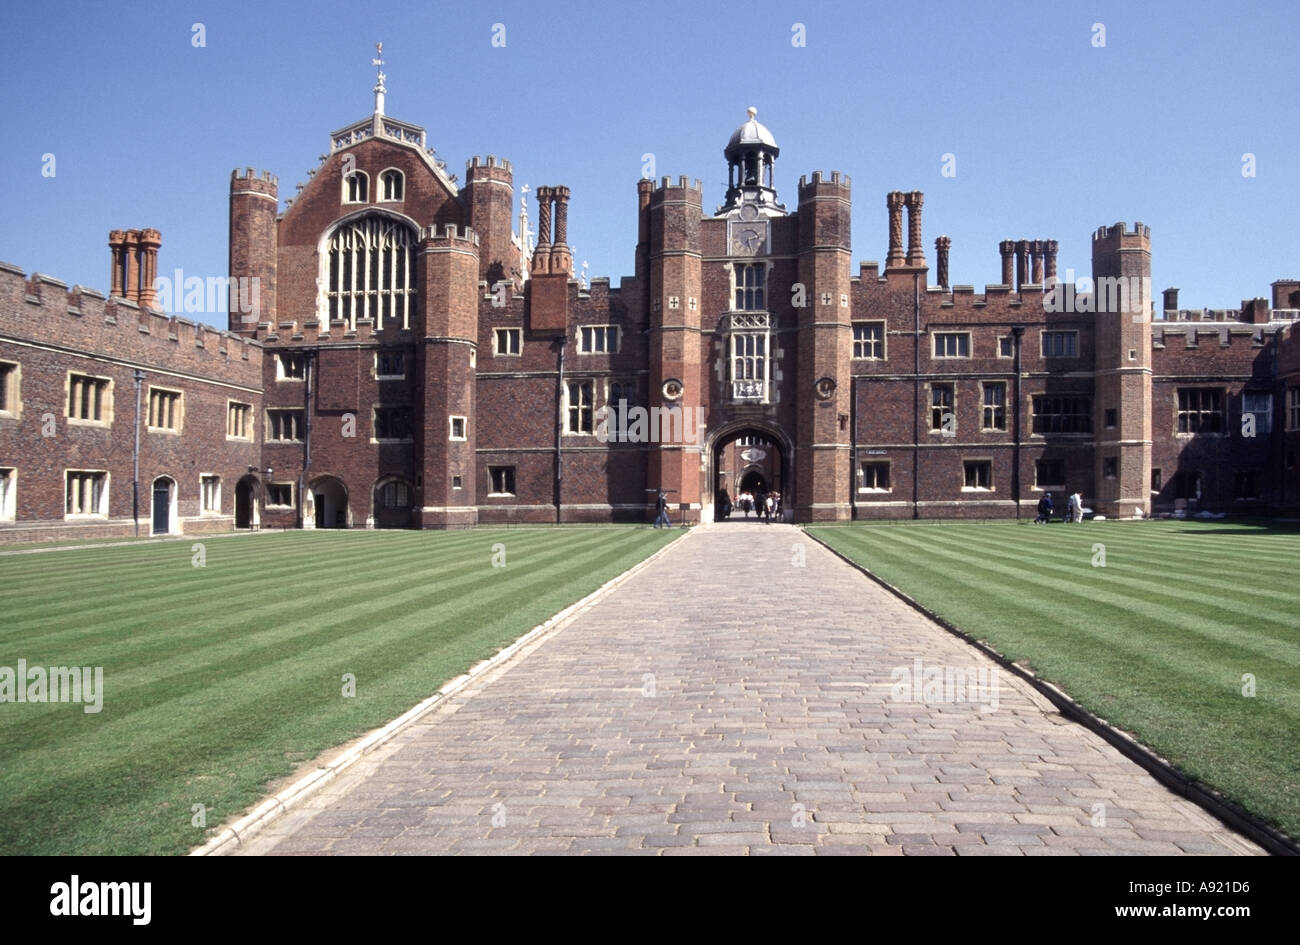 Hampton Court Palace & historical Base courtyard and lawn stripes part of the major tourist attraction at Richmond upon Thames London England UK Stock Photo